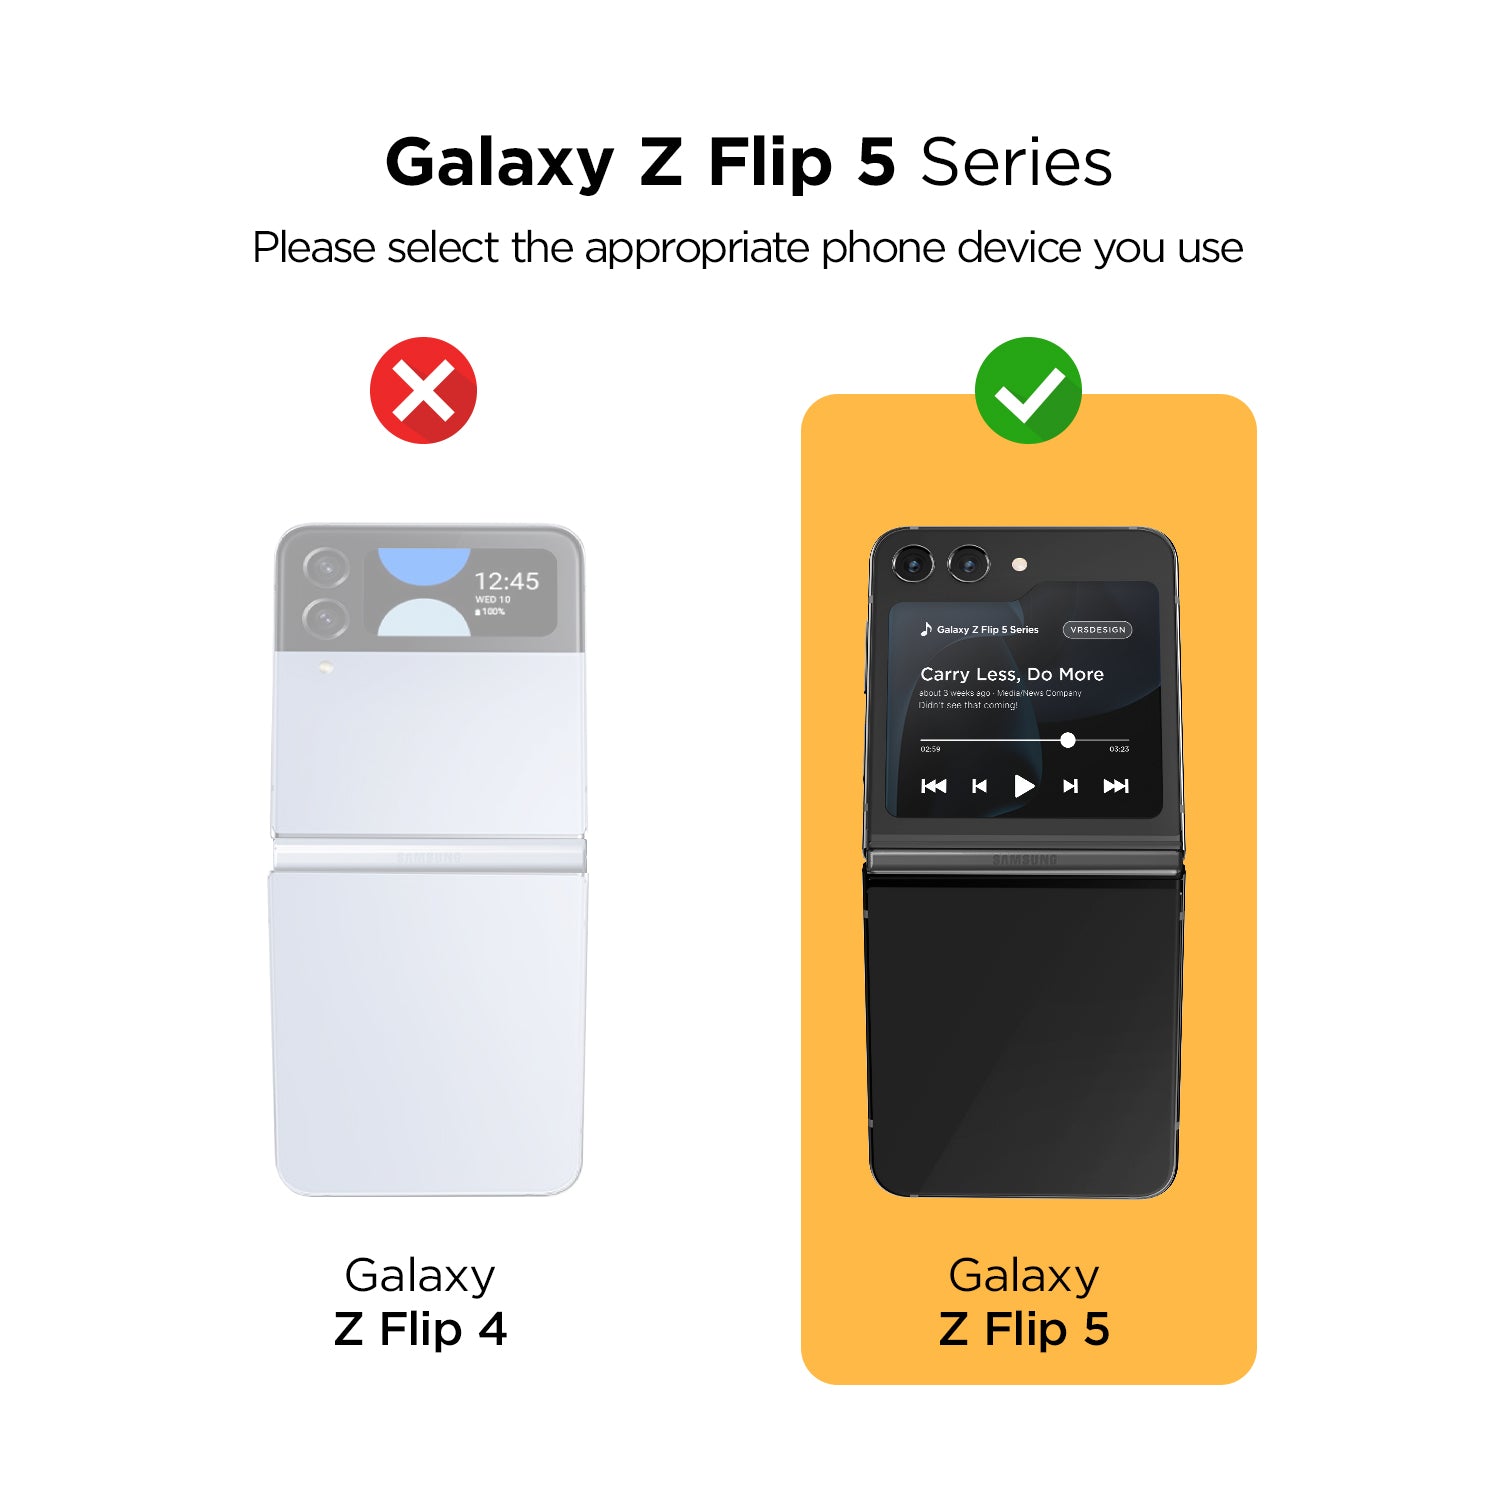 Samsung Galaxy Z Flip 5 now on sale in India: 5 reasons to buy